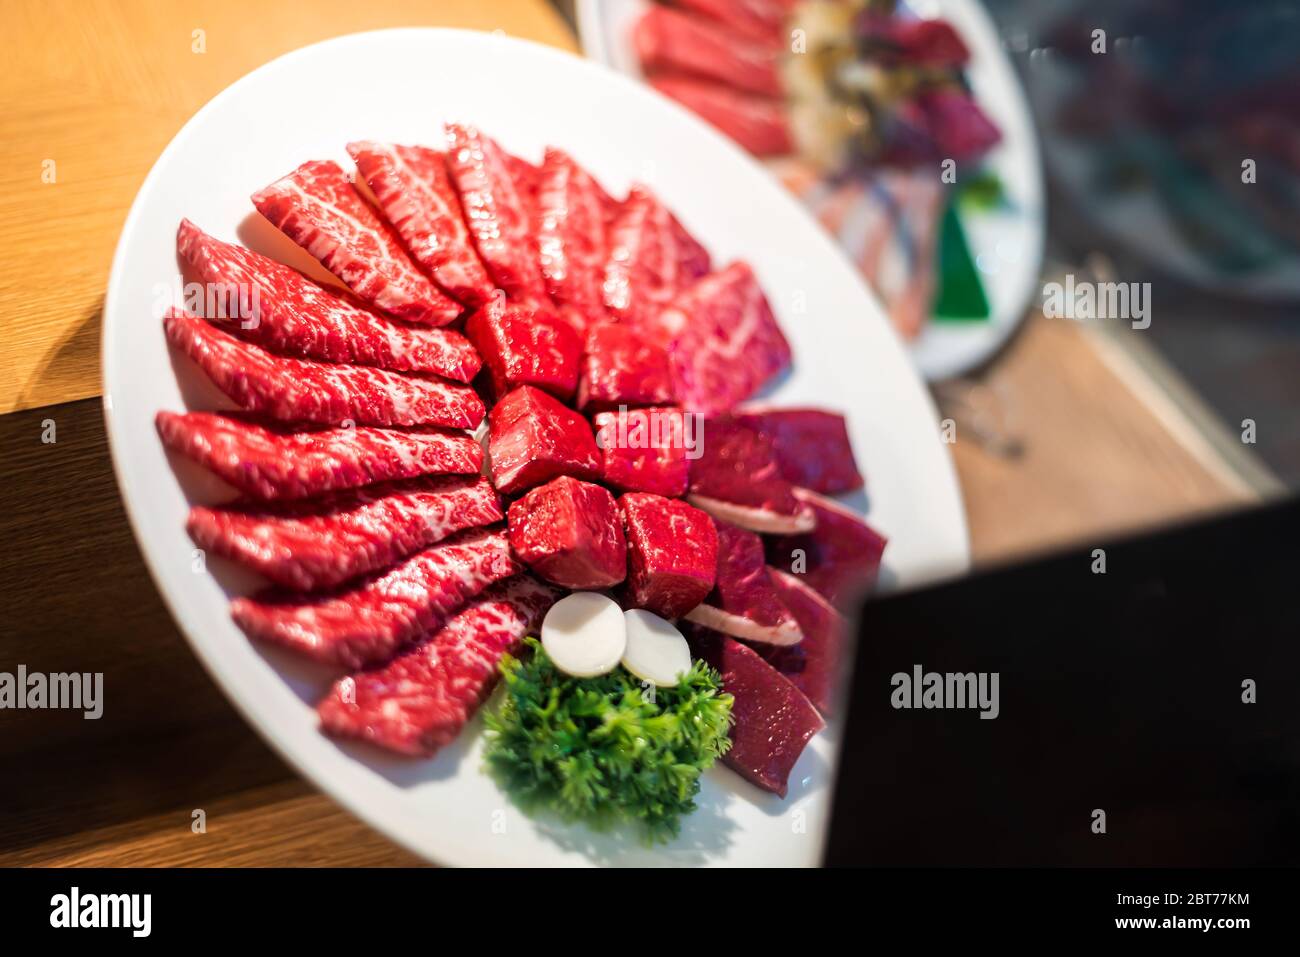 Closeup of plate display outside restaurant with cuts of red raw meat kobe or wagyu beef behind glass window in Tokyo Stock Photo